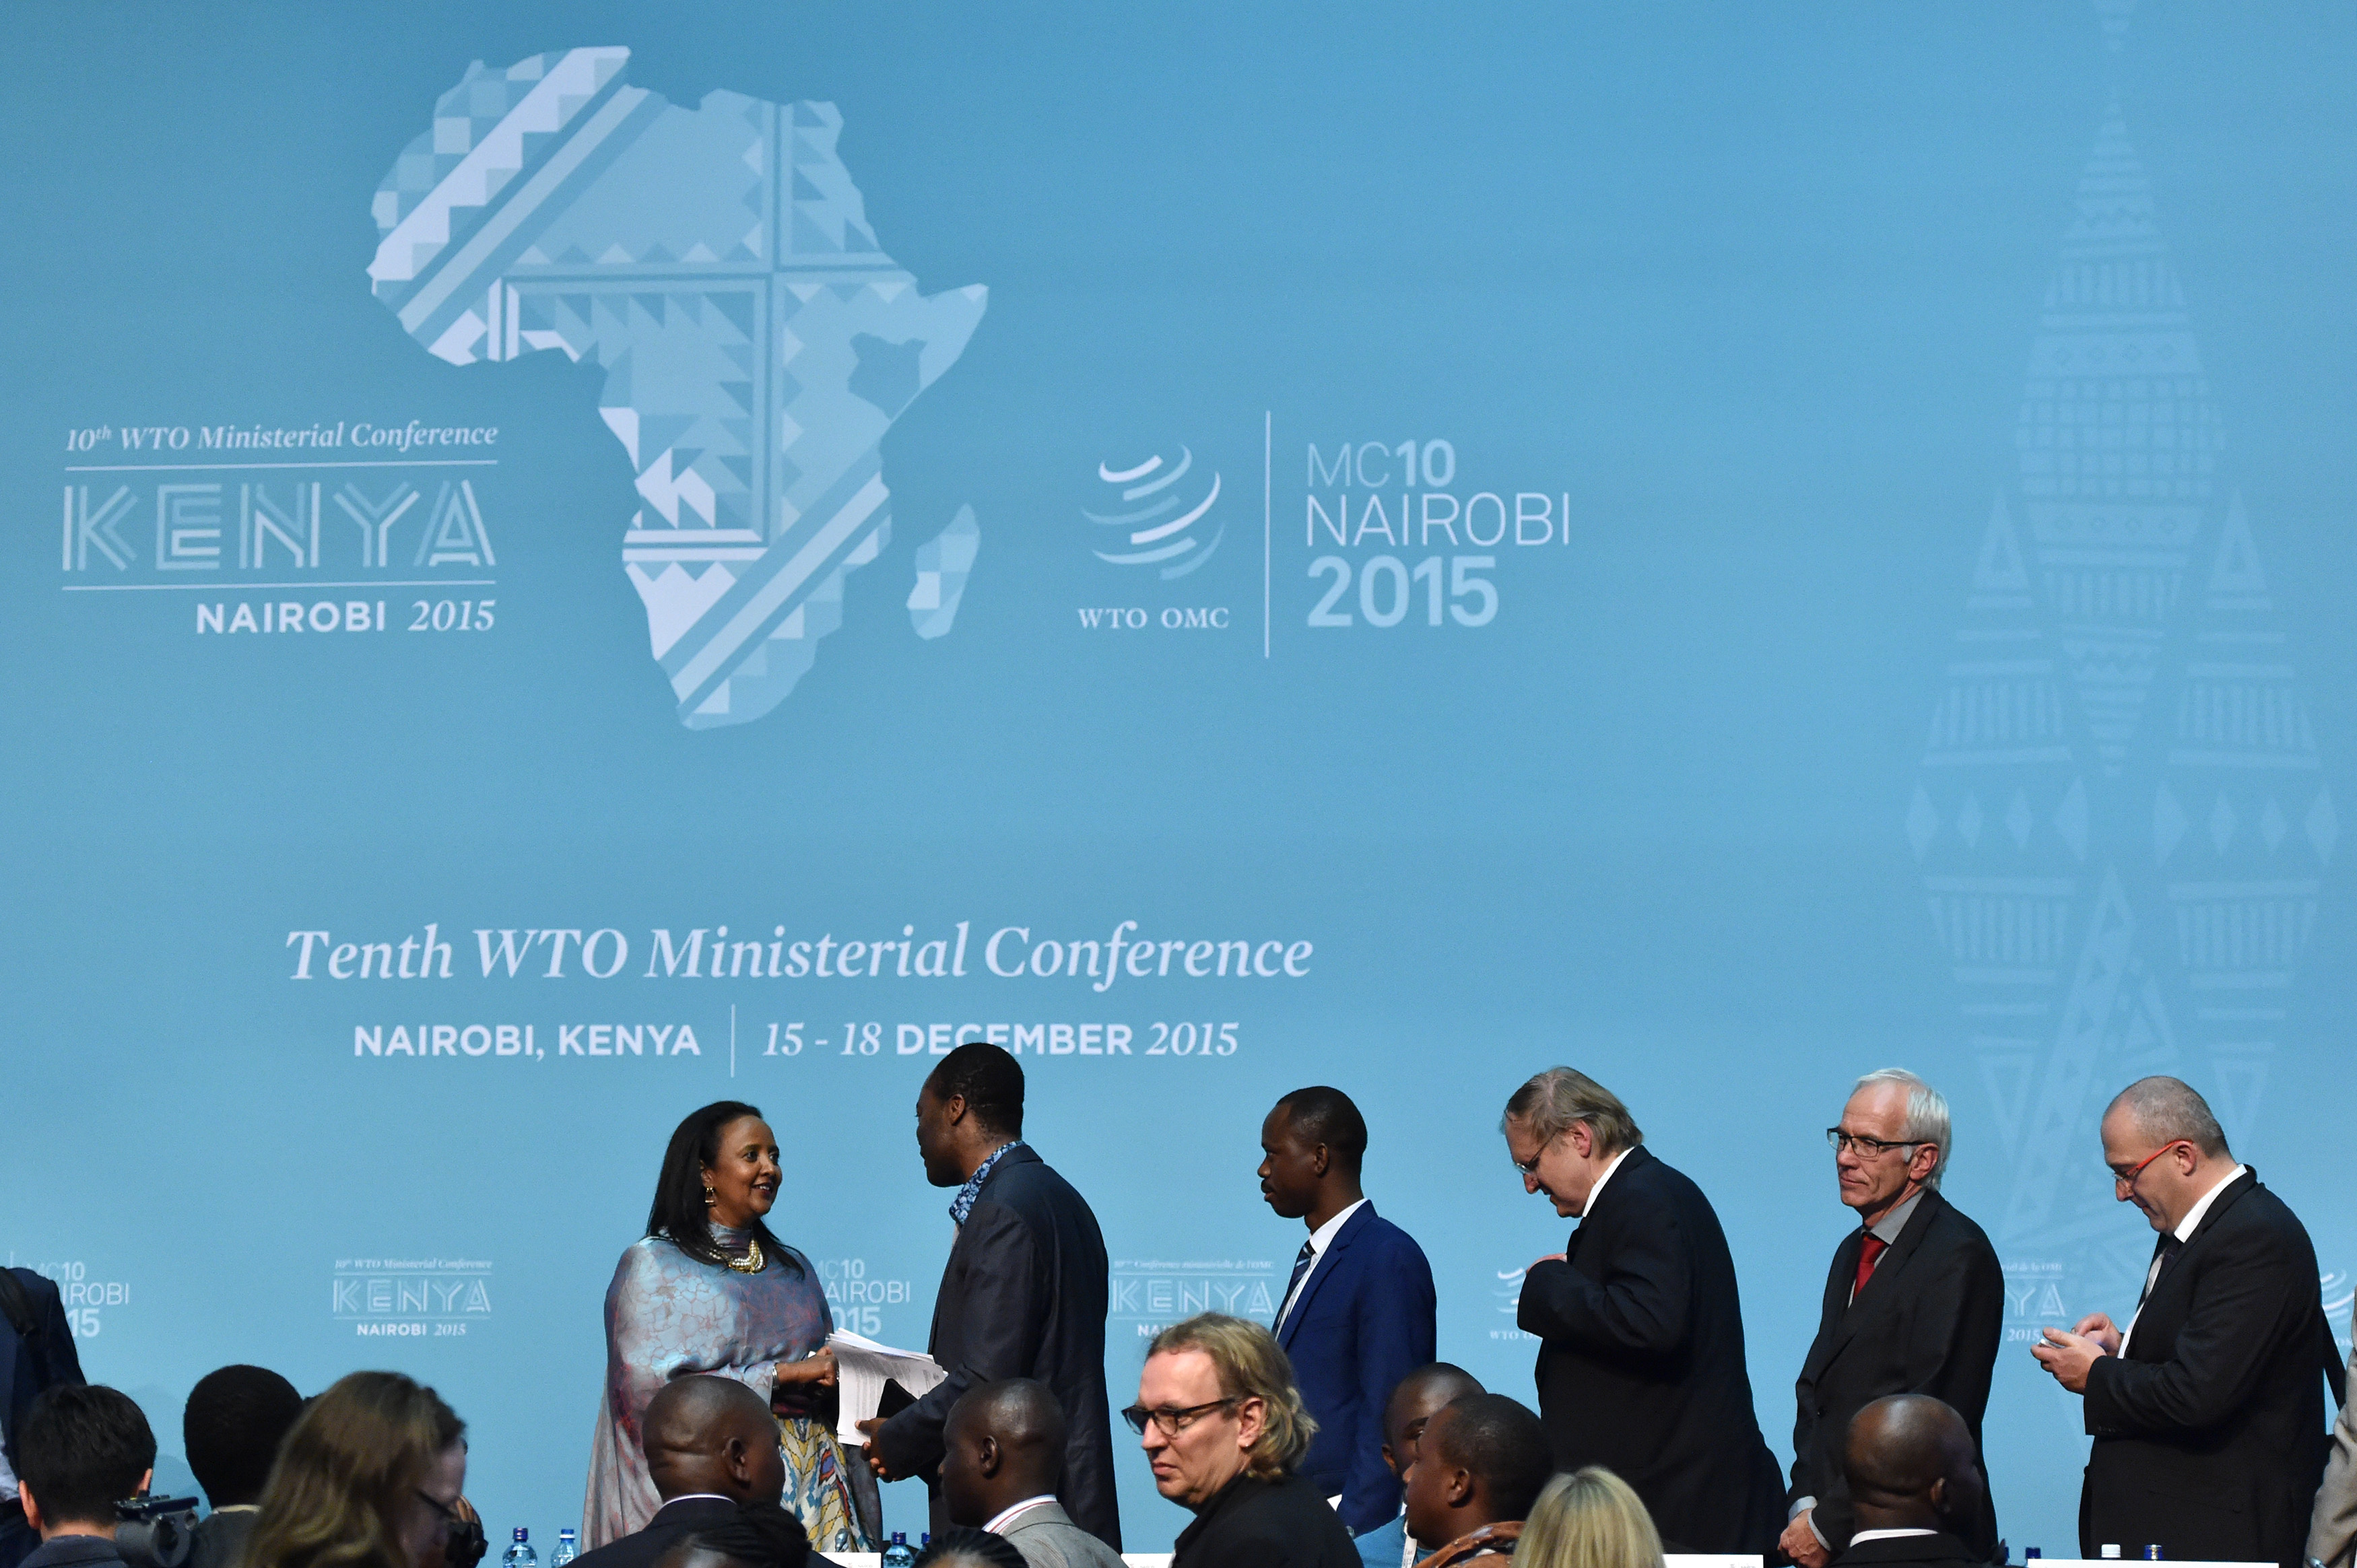 (151219)-- NAIROBI, Dec. 19, 2015(Xinhua)-- Delegates congratulate Chair of the 10th WTO Ministerial Conference and Kenyan Foreign Minister Amina Mohamed (1st L) for the achievements of the conference after the closing of the 10th WTO Ministerial Conference in Nairobi, Kenya, Dec. 19, 2015. The 10th Ministerial Conference of the World Trade Organization (WTO) in Nairobi came to an end on Saturday after an extended negotiating period with a new Nairobi Declaration that promises to keep the international trading system alive.(Xinhua/Sun Ruibo)